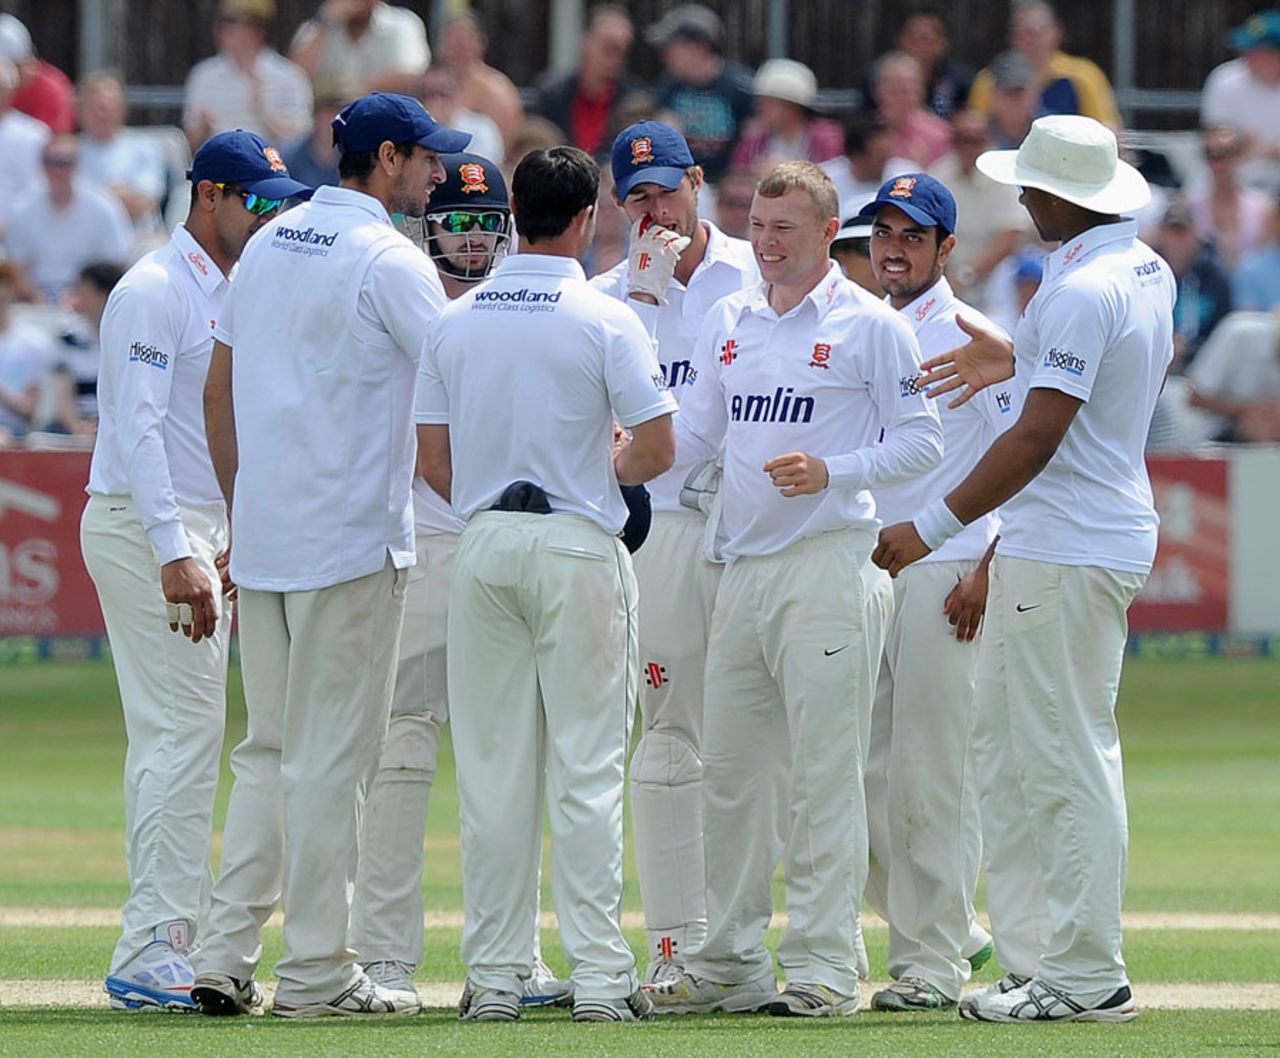 Tom Craddock is congratulated on his five-four, Essex v England, 2nd day, Chelmsford, July 1, 2013